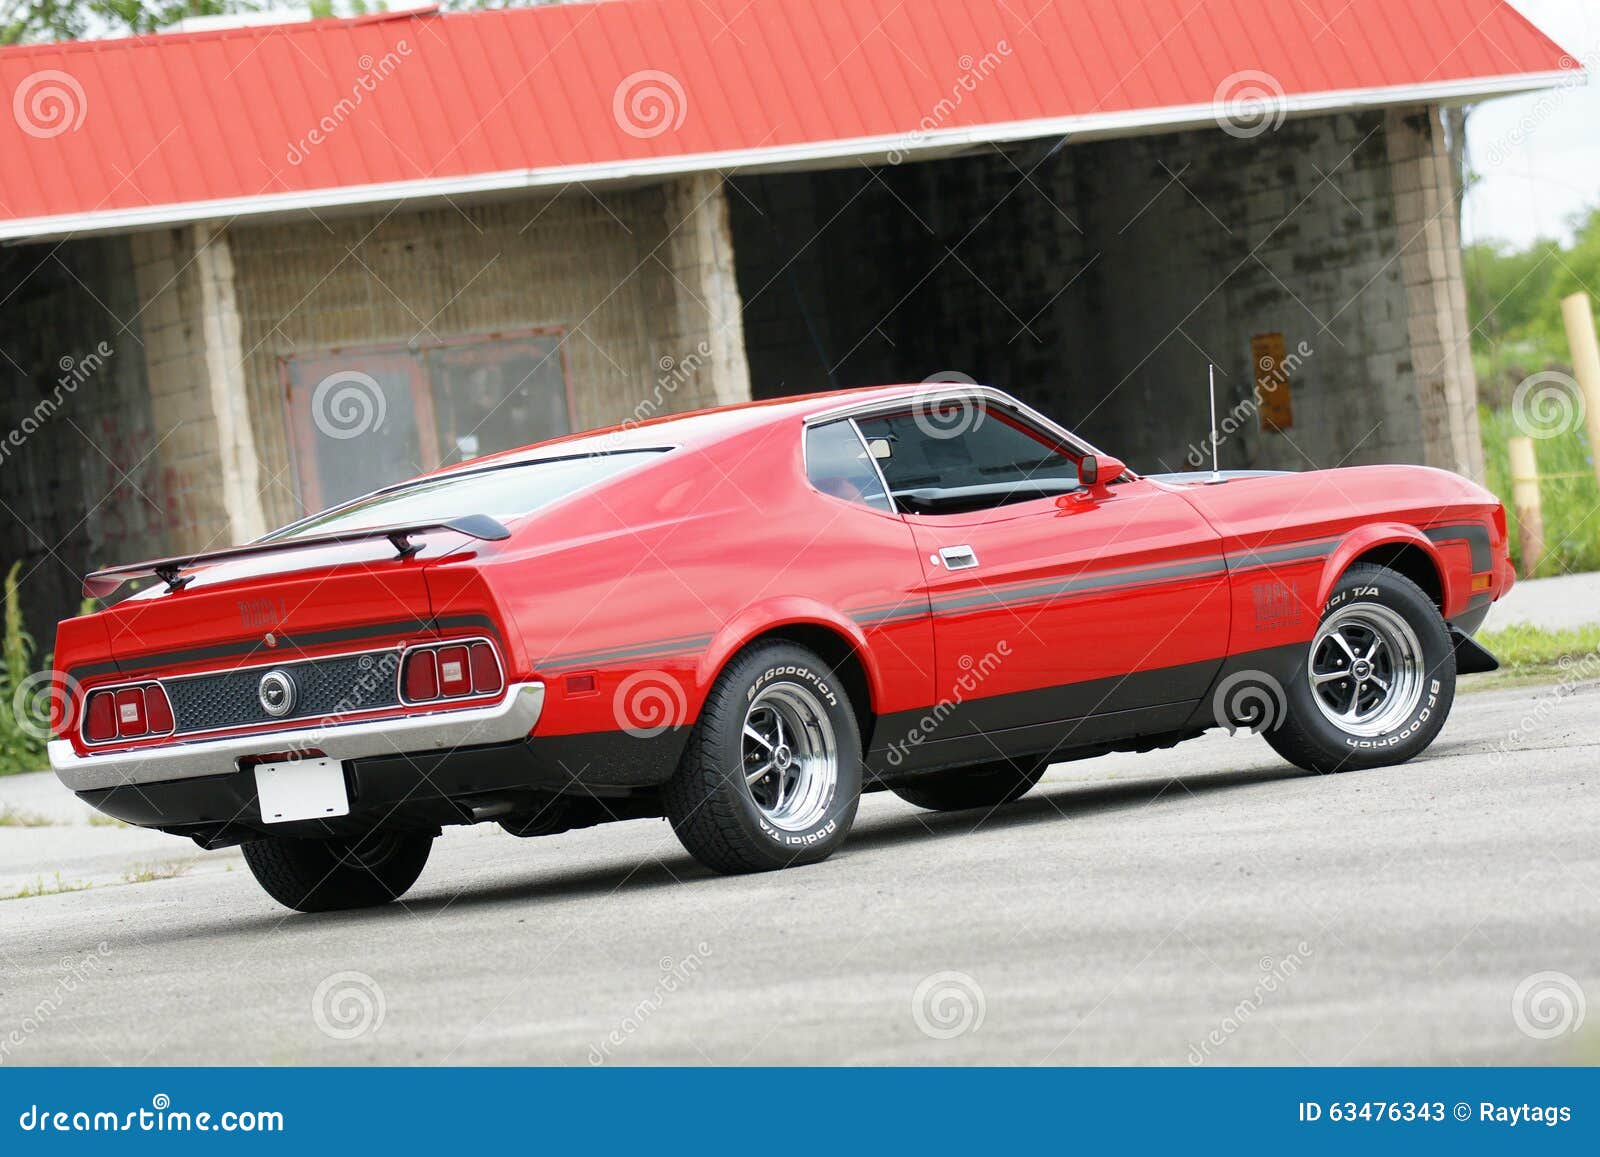 Mustang editorial stock photo. Image of auto, ford, automobile - 63476343